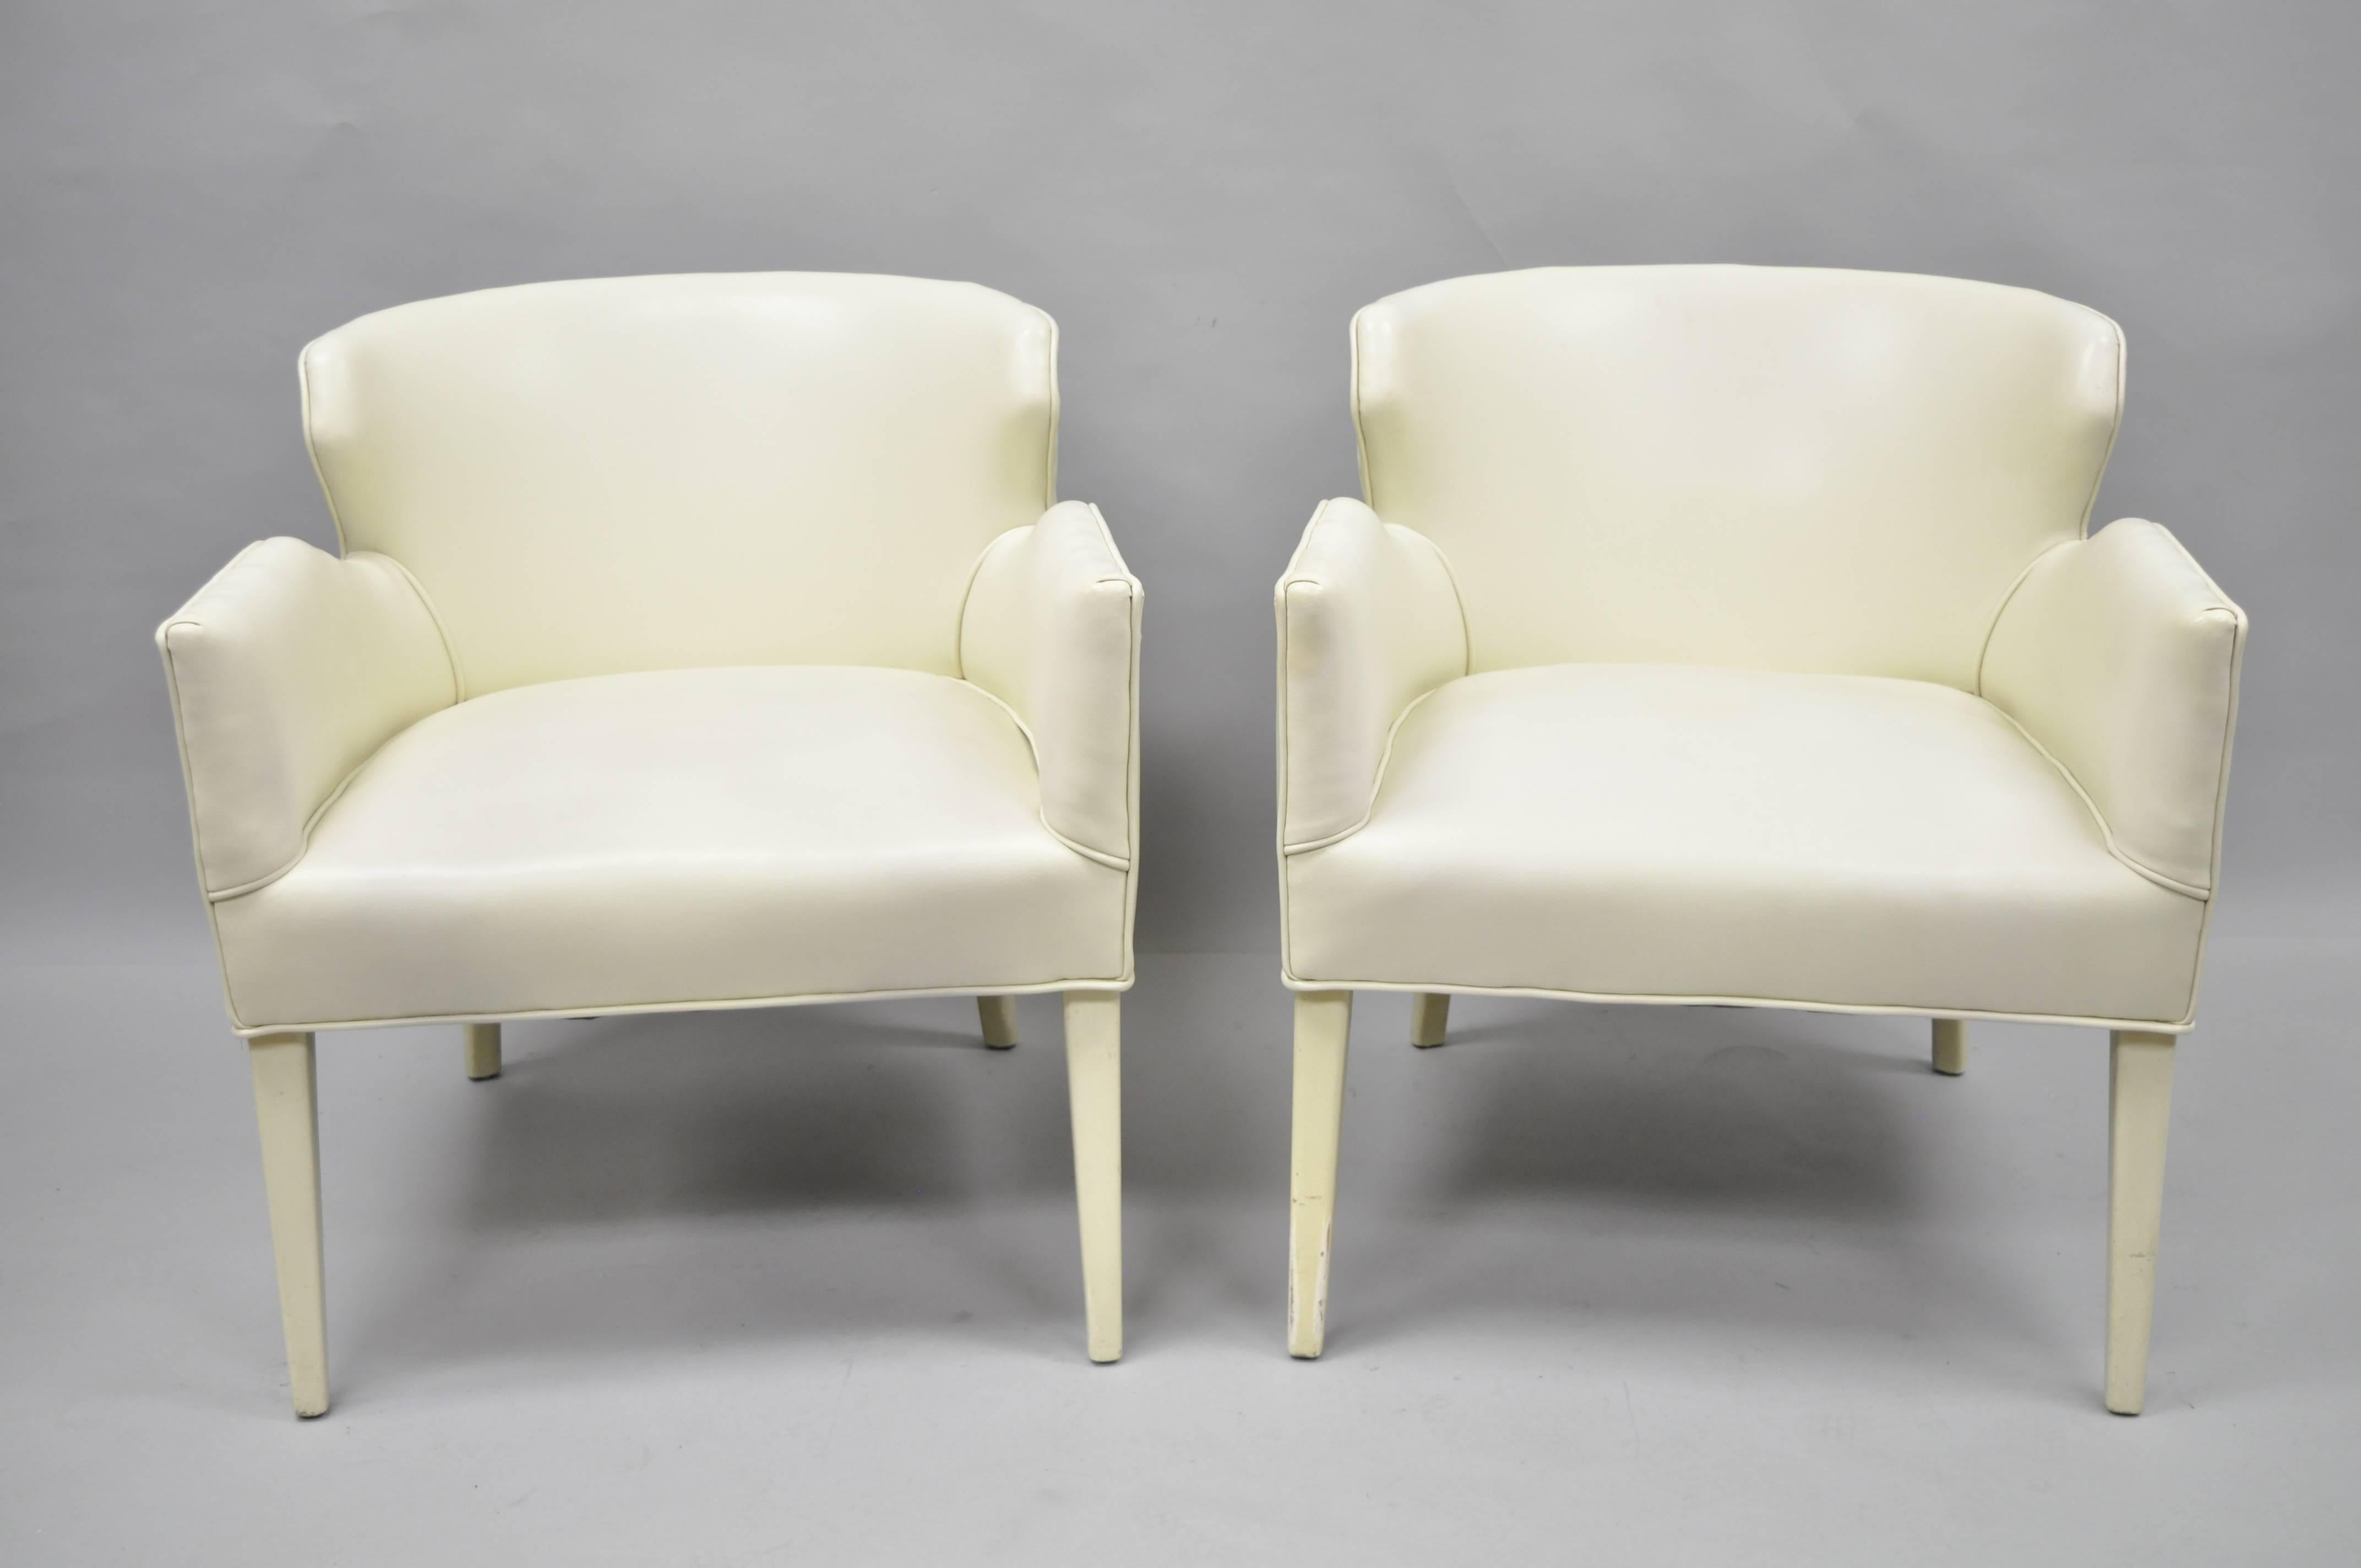 Pair of vintage Mid-Century Modern sculptural club chairs in the manner of Paul McCobb and Harvey Probber. The pair features shapely barrel backs, heavy solid frames, nice deep seats, angled arms, off white vinyl upholstery and off-white tapered